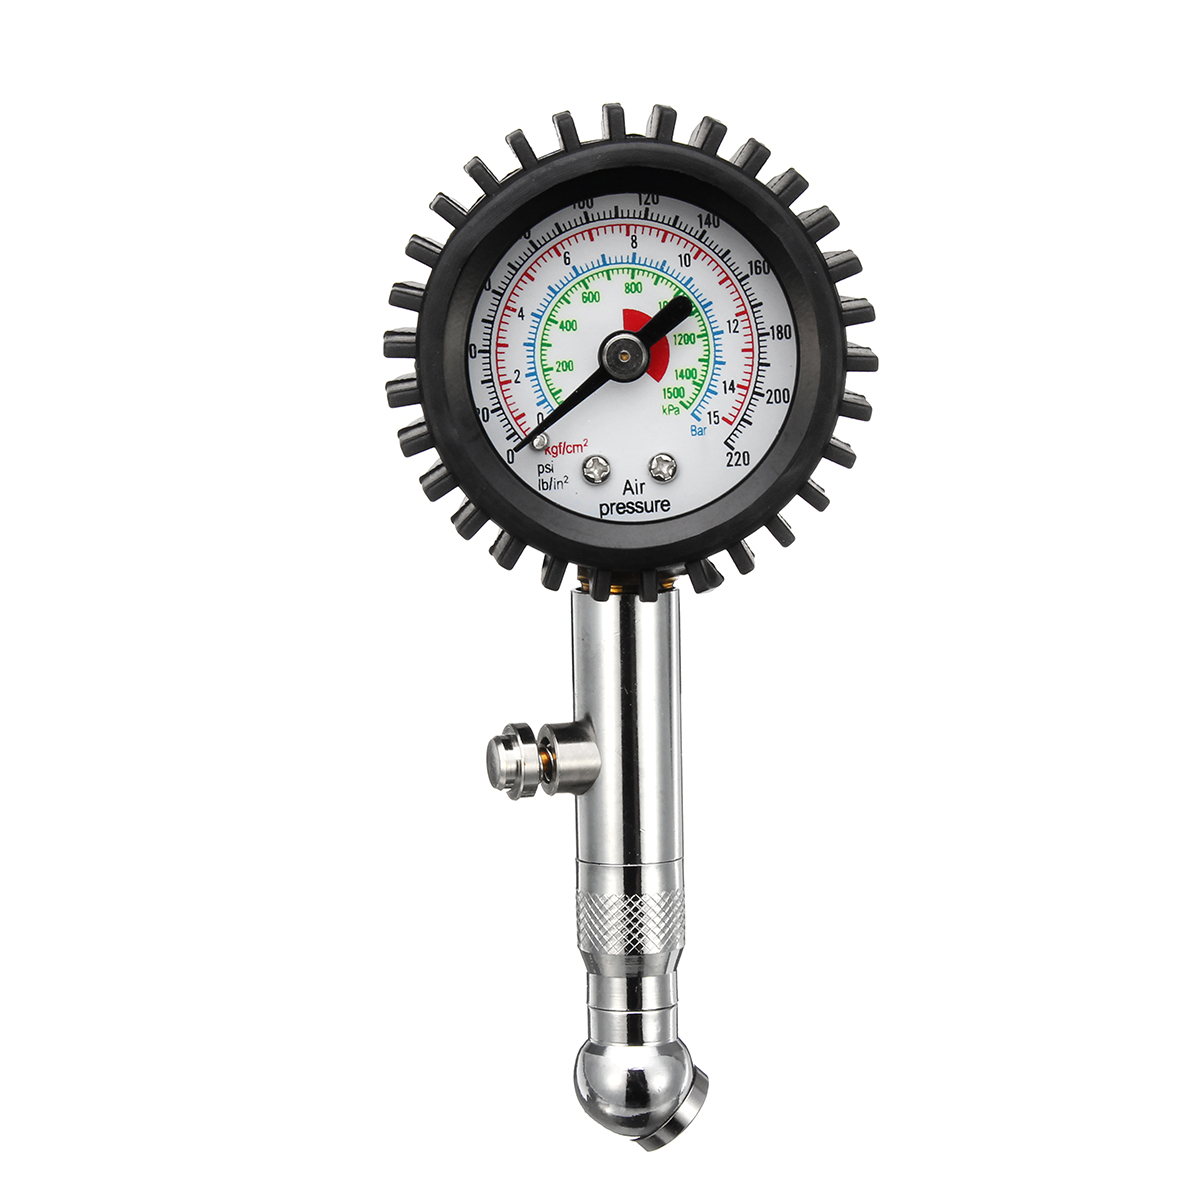 

220PSI Tire Tyre Air Pressure Gauge Dial Meter For Auto Car Vehicle Motorcycle Automobile